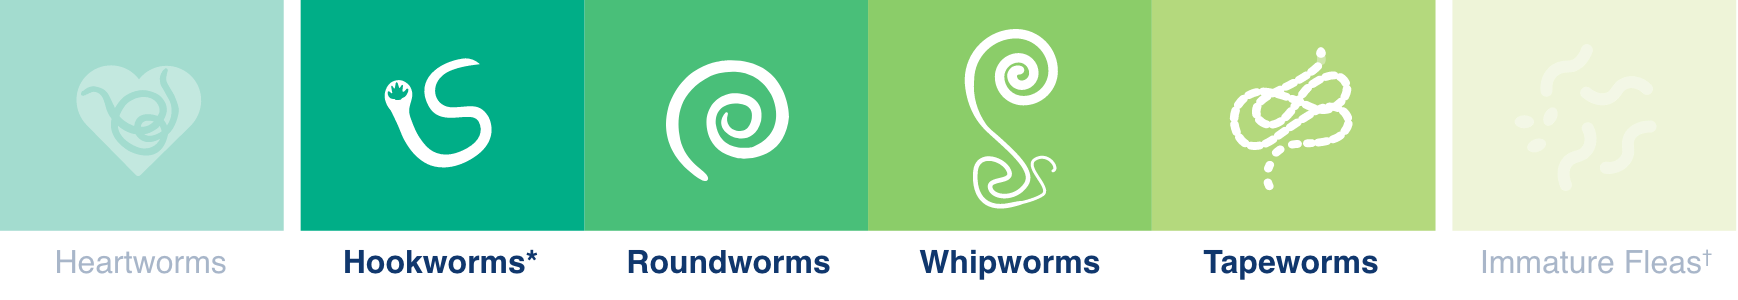 Parasites Hookworms, Roundworms, Whipworms, Tapeworms.